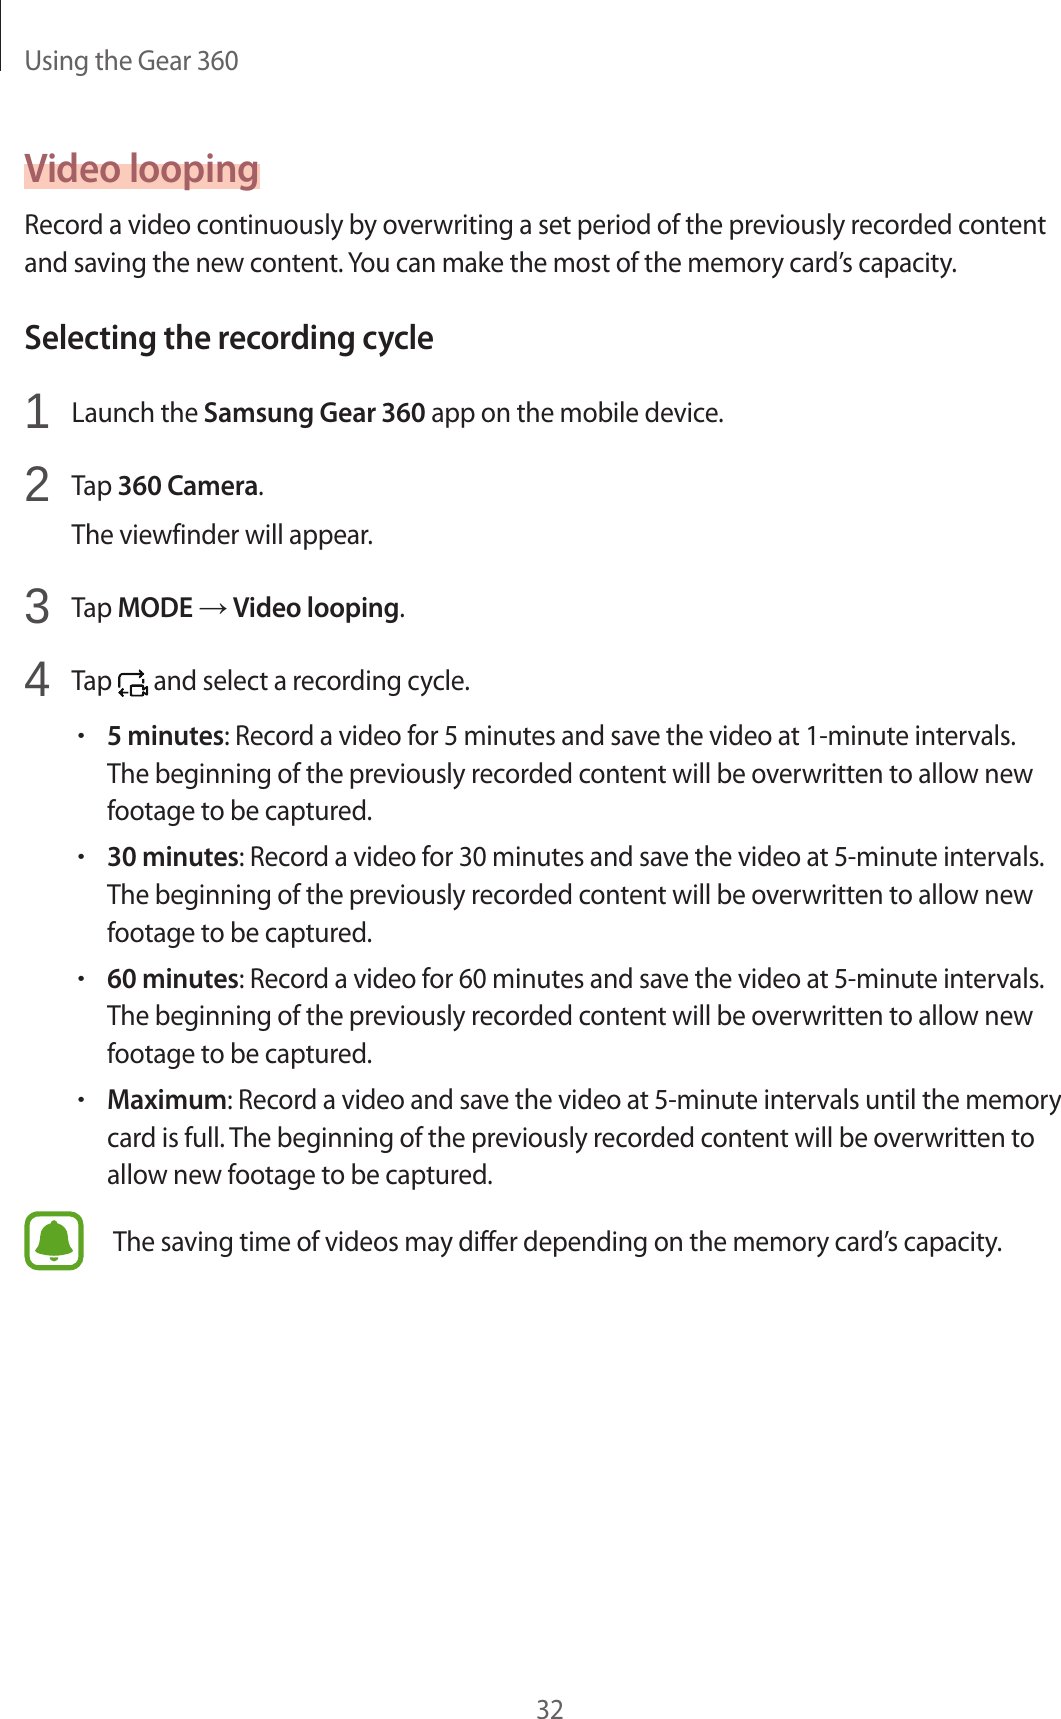 Using the Gear 36032Video loopingRecord a video continuously by overwriting a set period of the previously recorded content and saving the new content. You can make the most of the memory card’s capacity.Selecting the recording cycle1  Launch the Samsung Gear 360 app on the mobile device.2  Tap 360 Camera.The viewfinder will appear.3  Tap MODE → Video looping.4  Tap   and select a recording cycle.•5 minutes: Record a video for 5 minutes and save the video at 1-minute intervals. The beginning of the previously recorded content will be overwritten to allow new footage to be captured.•30 minutes: Record a video for 30 minutes and save the video at 5-minute intervals. The beginning of the previously recorded content will be overwritten to allow new footage to be captured.•60 minutes: Record a video for 60 minutes and save the video at 5-minute intervals. The beginning of the previously recorded content will be overwritten to allow new footage to be captured.•Maximum: Record a video and save the video at 5-minute intervals until the memory card is full. The beginning of the previously recorded content will be overwritten to allow new footage to be captured.The saving time of videos may differ depending on the memory card’s capacity.